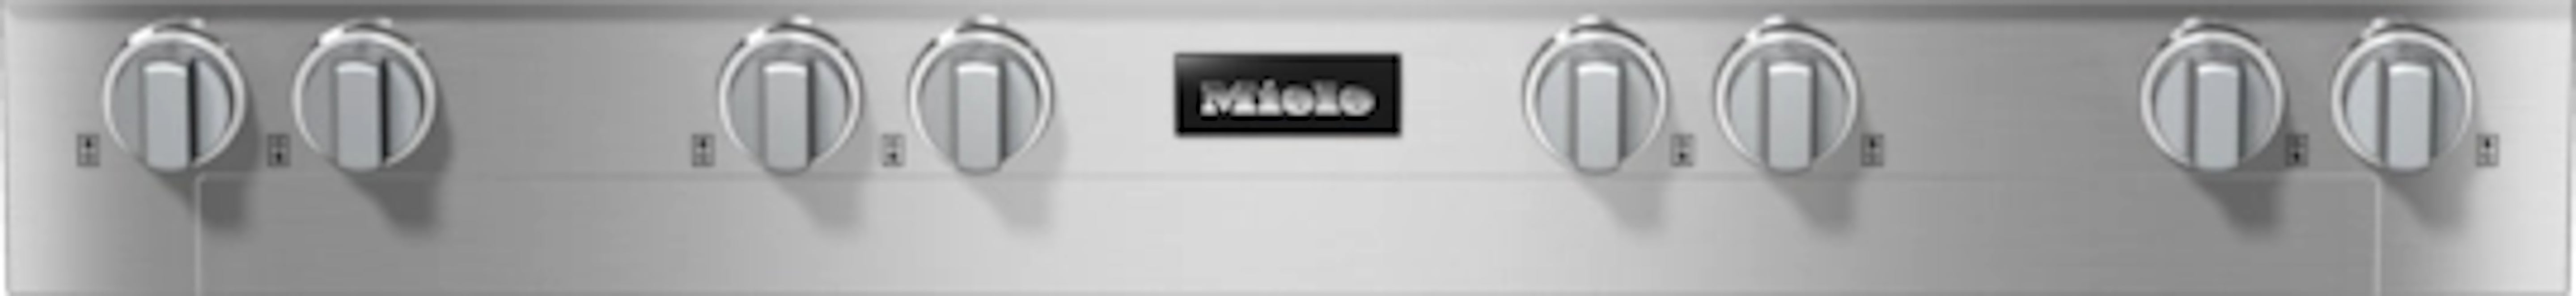 Miele - 48 Inch Gas Cooktop in Stainless - KMR 1354-3 G